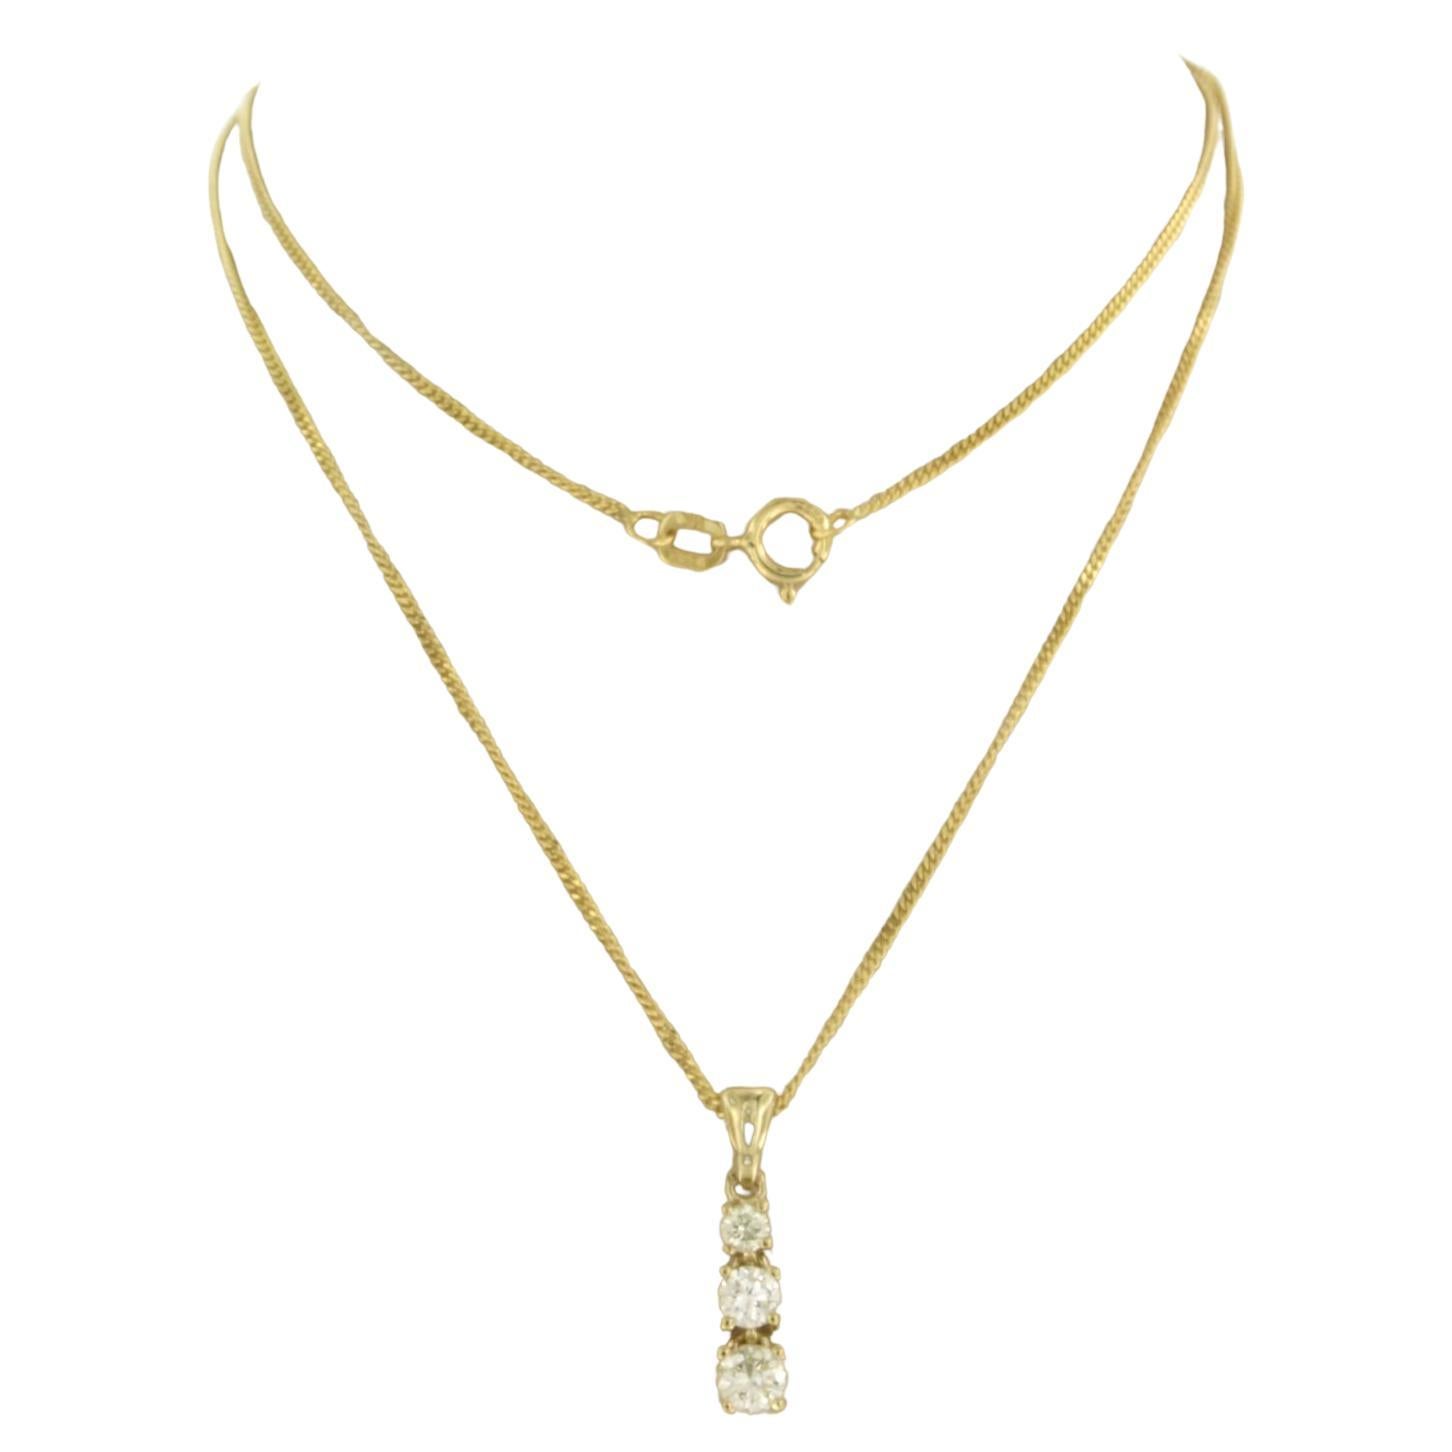 Necklace with pendant set with diamonds 14k yellow gold